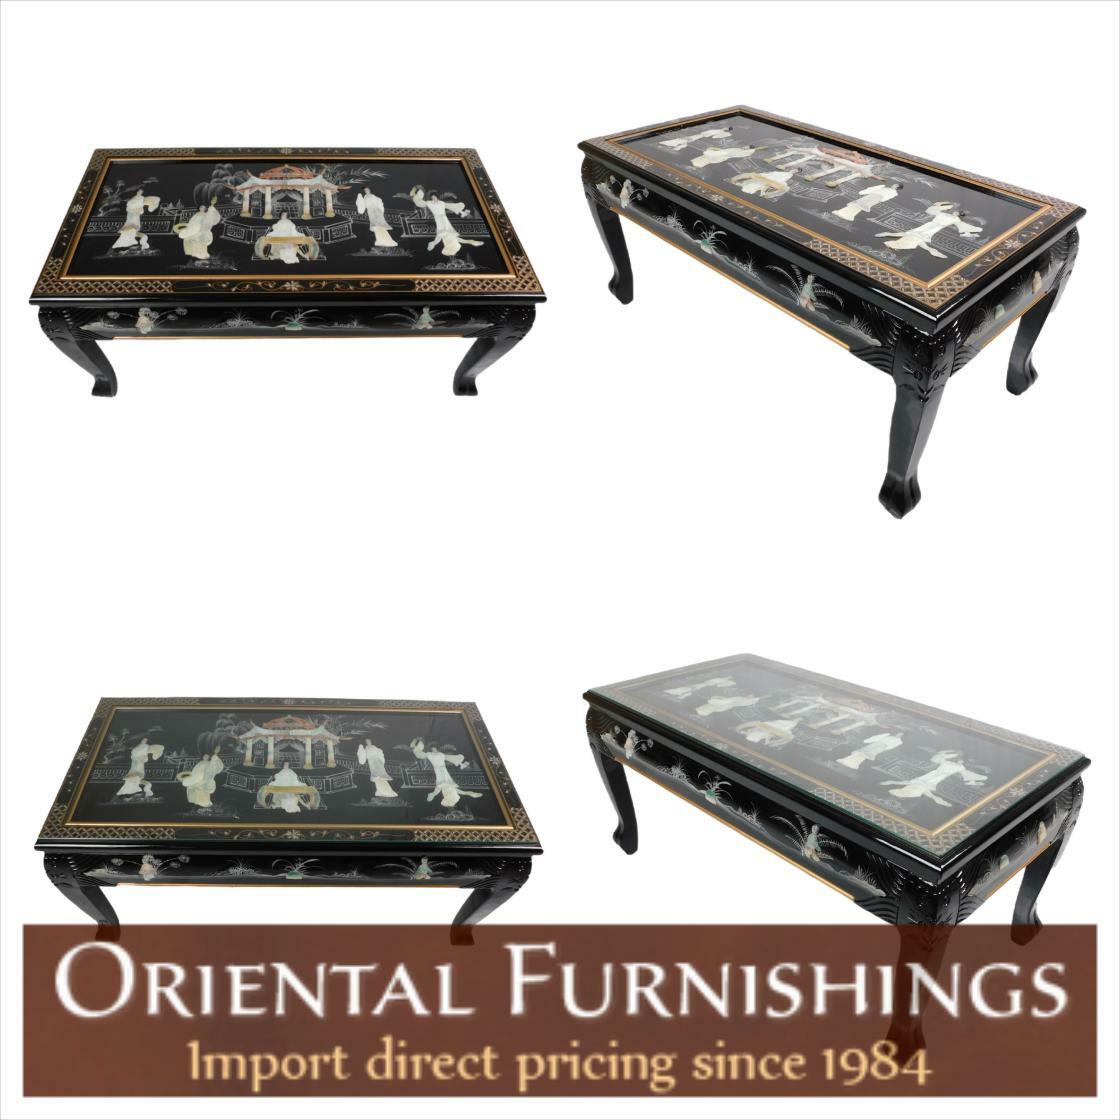 #chineseantiques Ball and Claw Lacquer Mother Of Pearl Inlaid Dragon Coffee Table Seen here: bit.ly/3sEJZU6